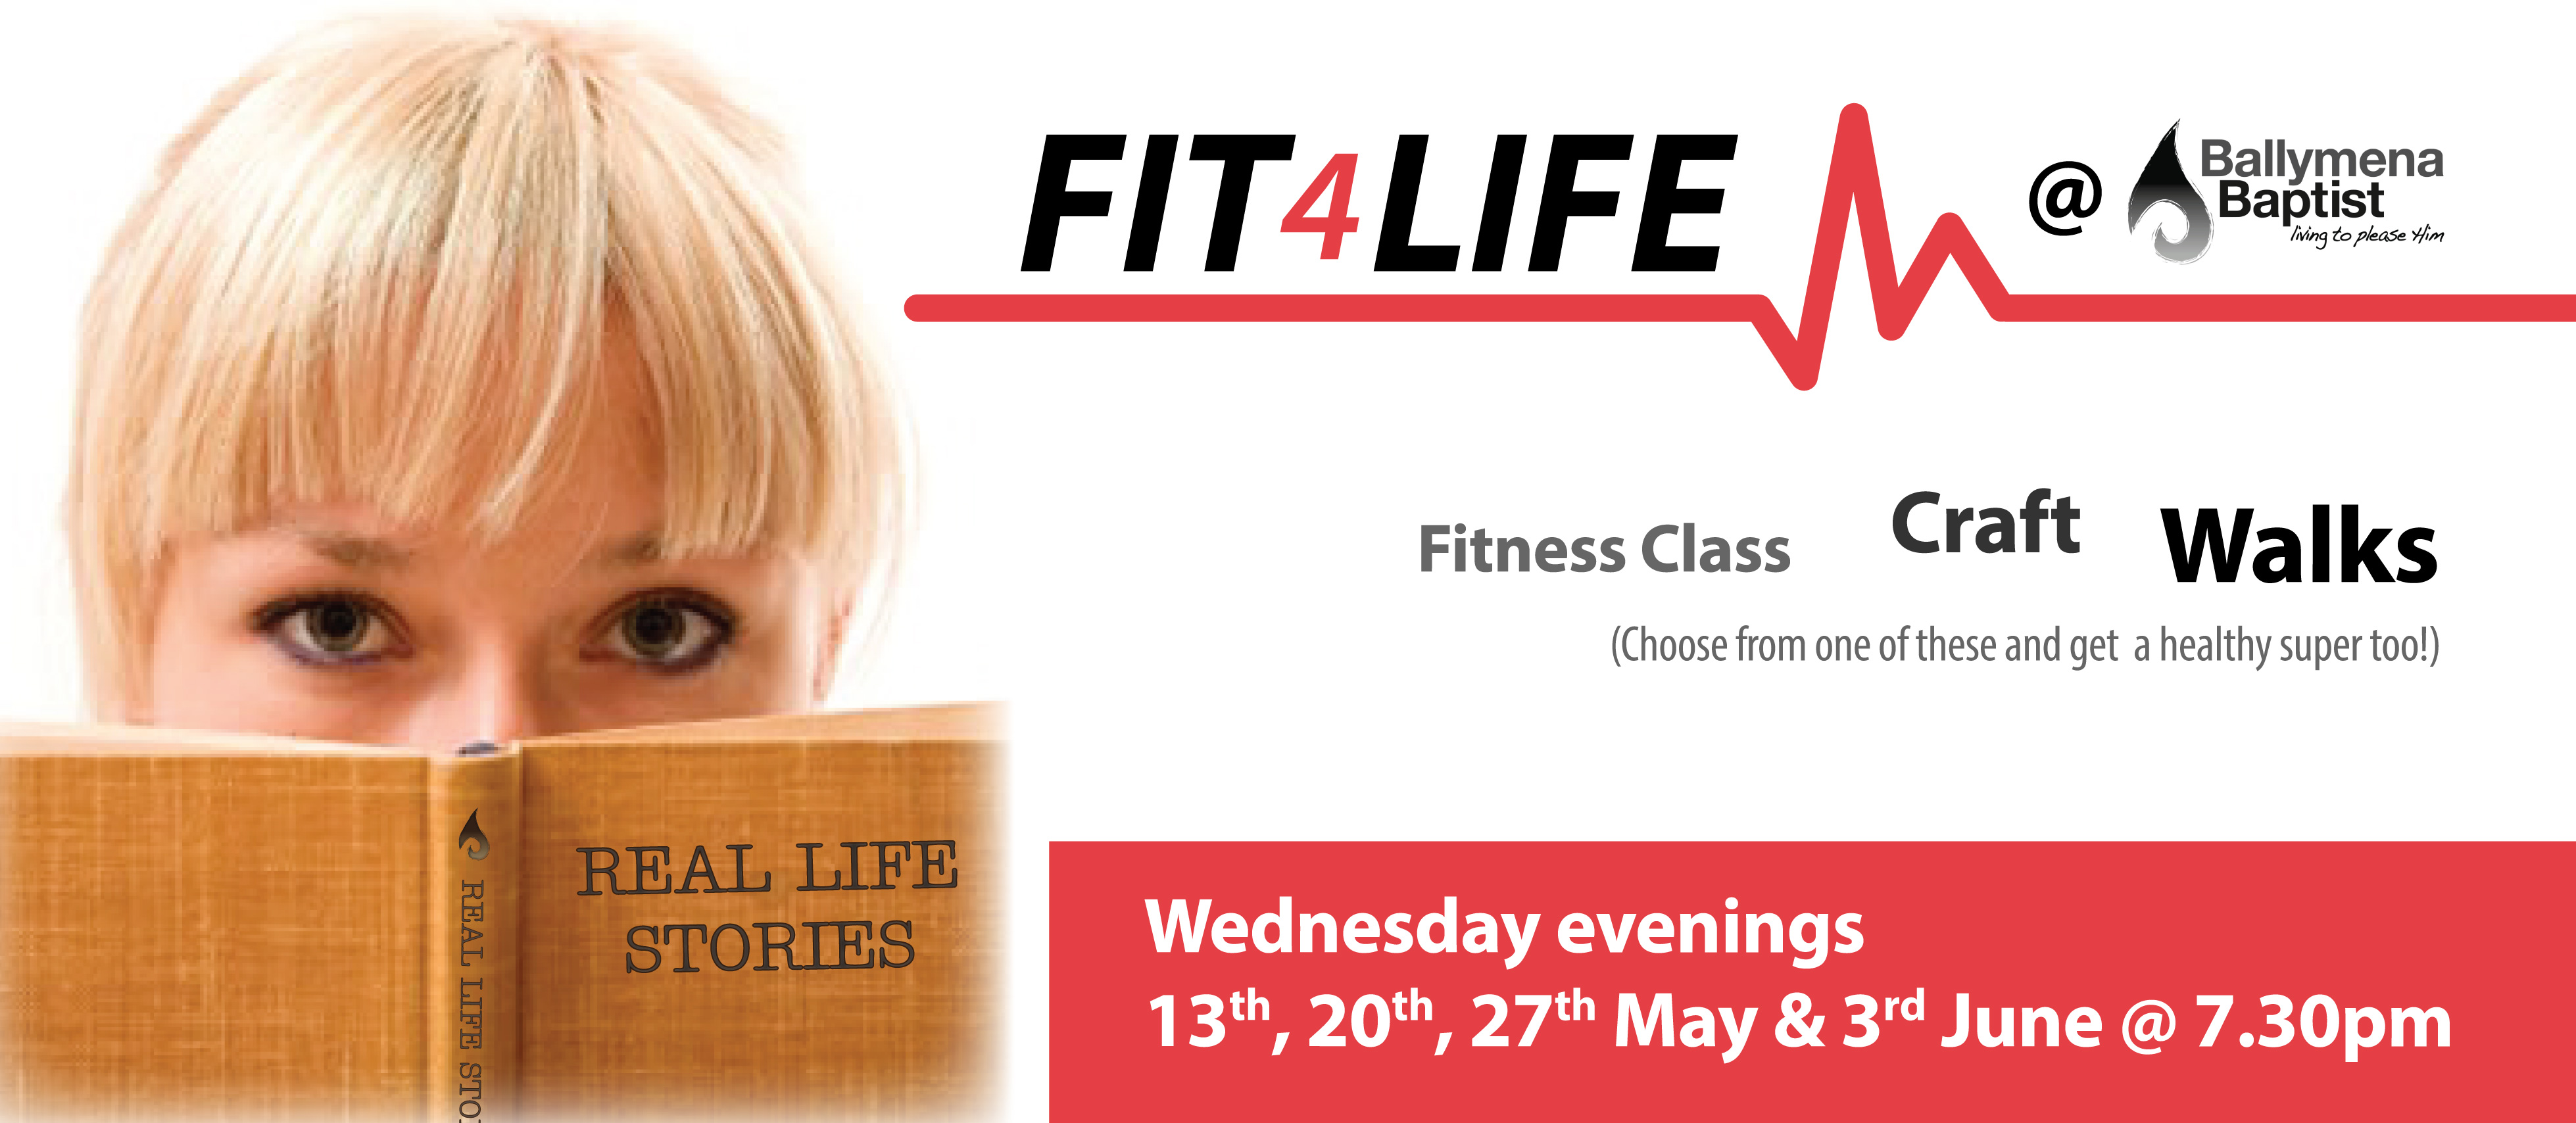 Fit 4 Life 2015